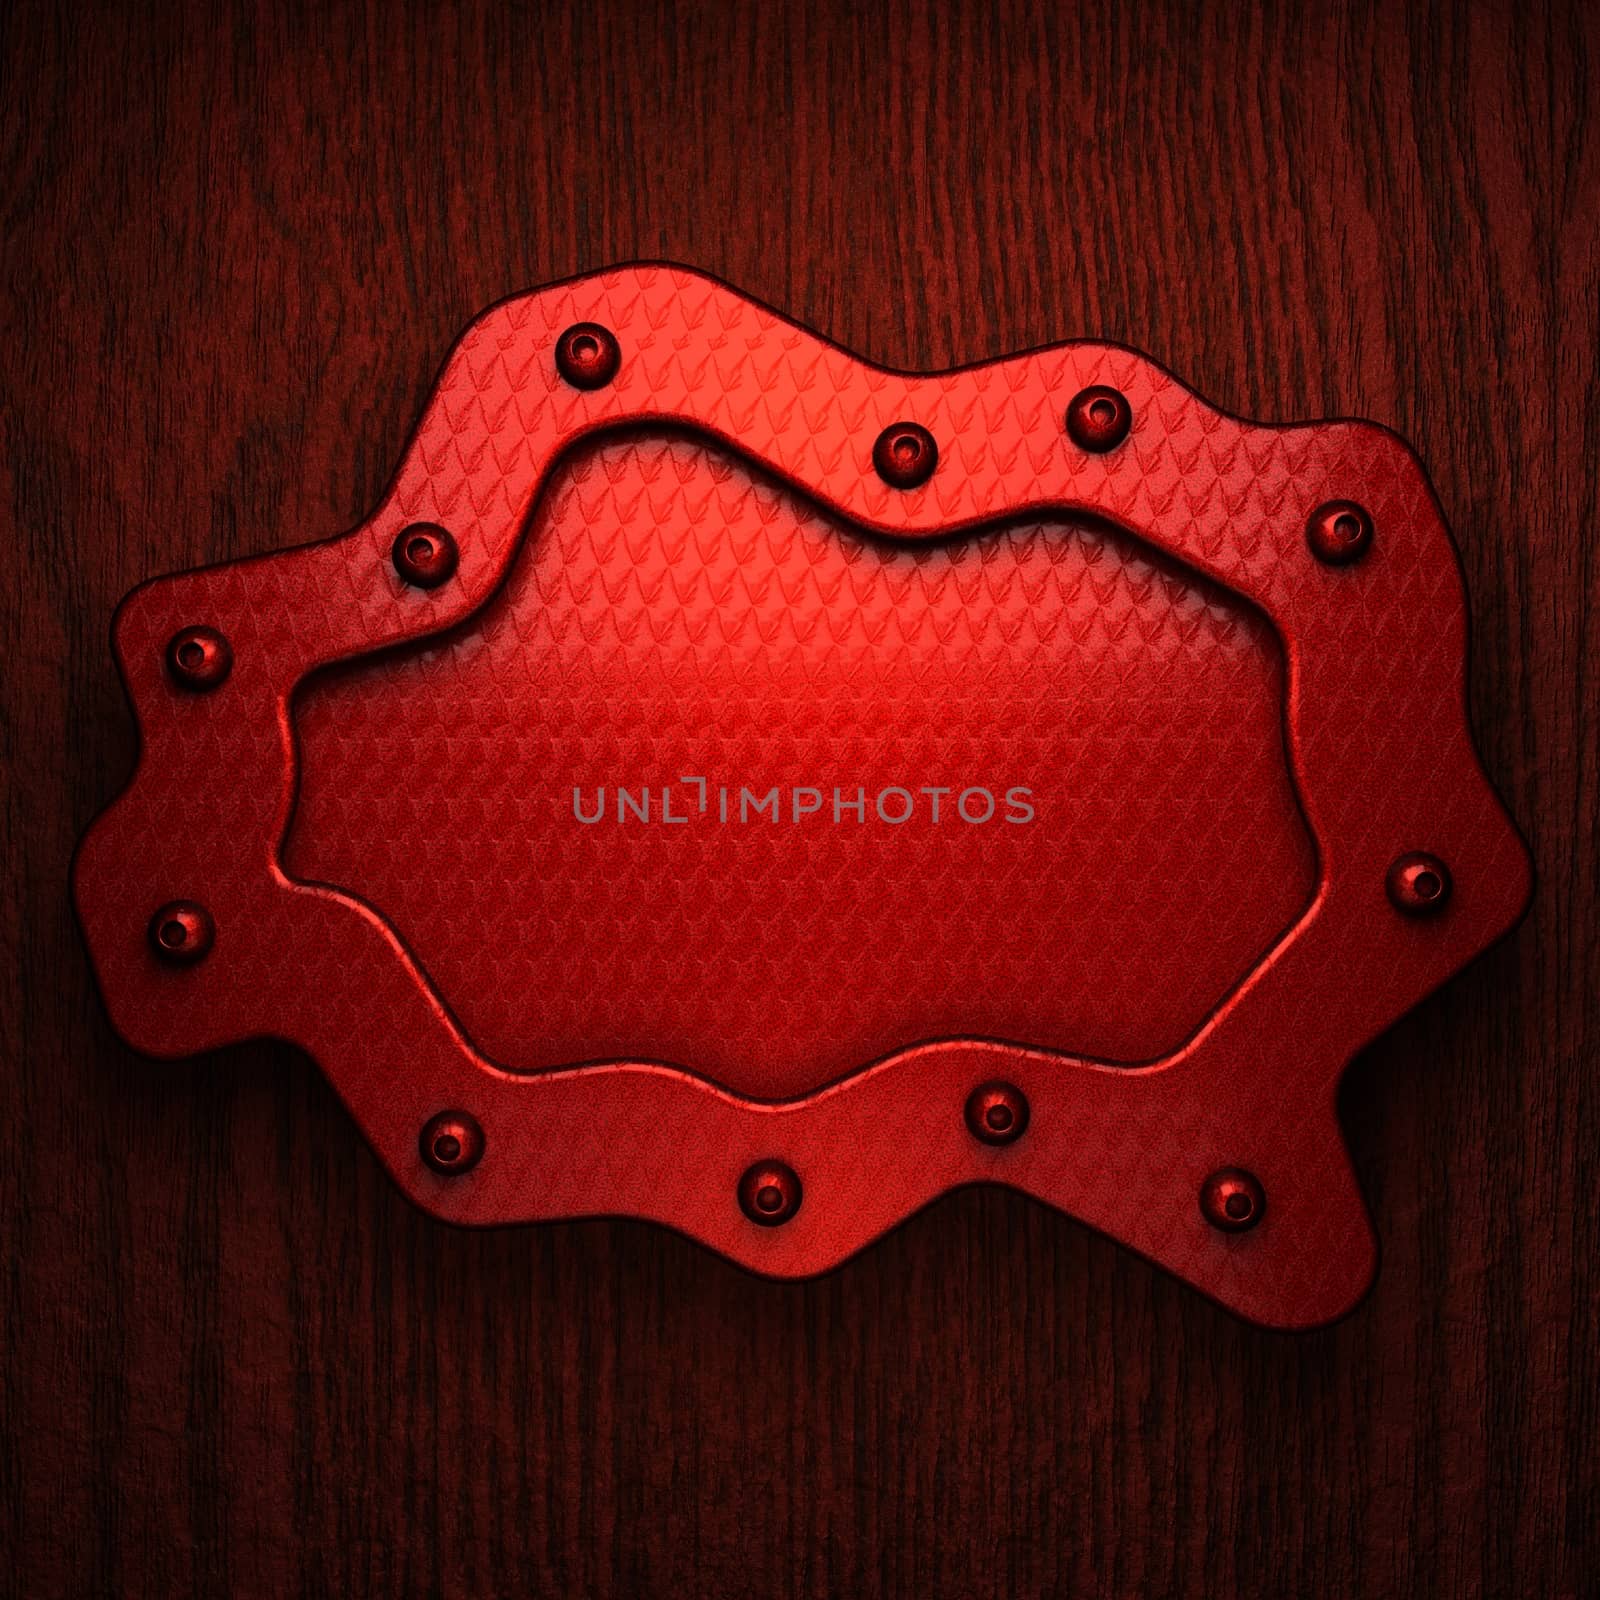 red pollished metal on wooden bachkround